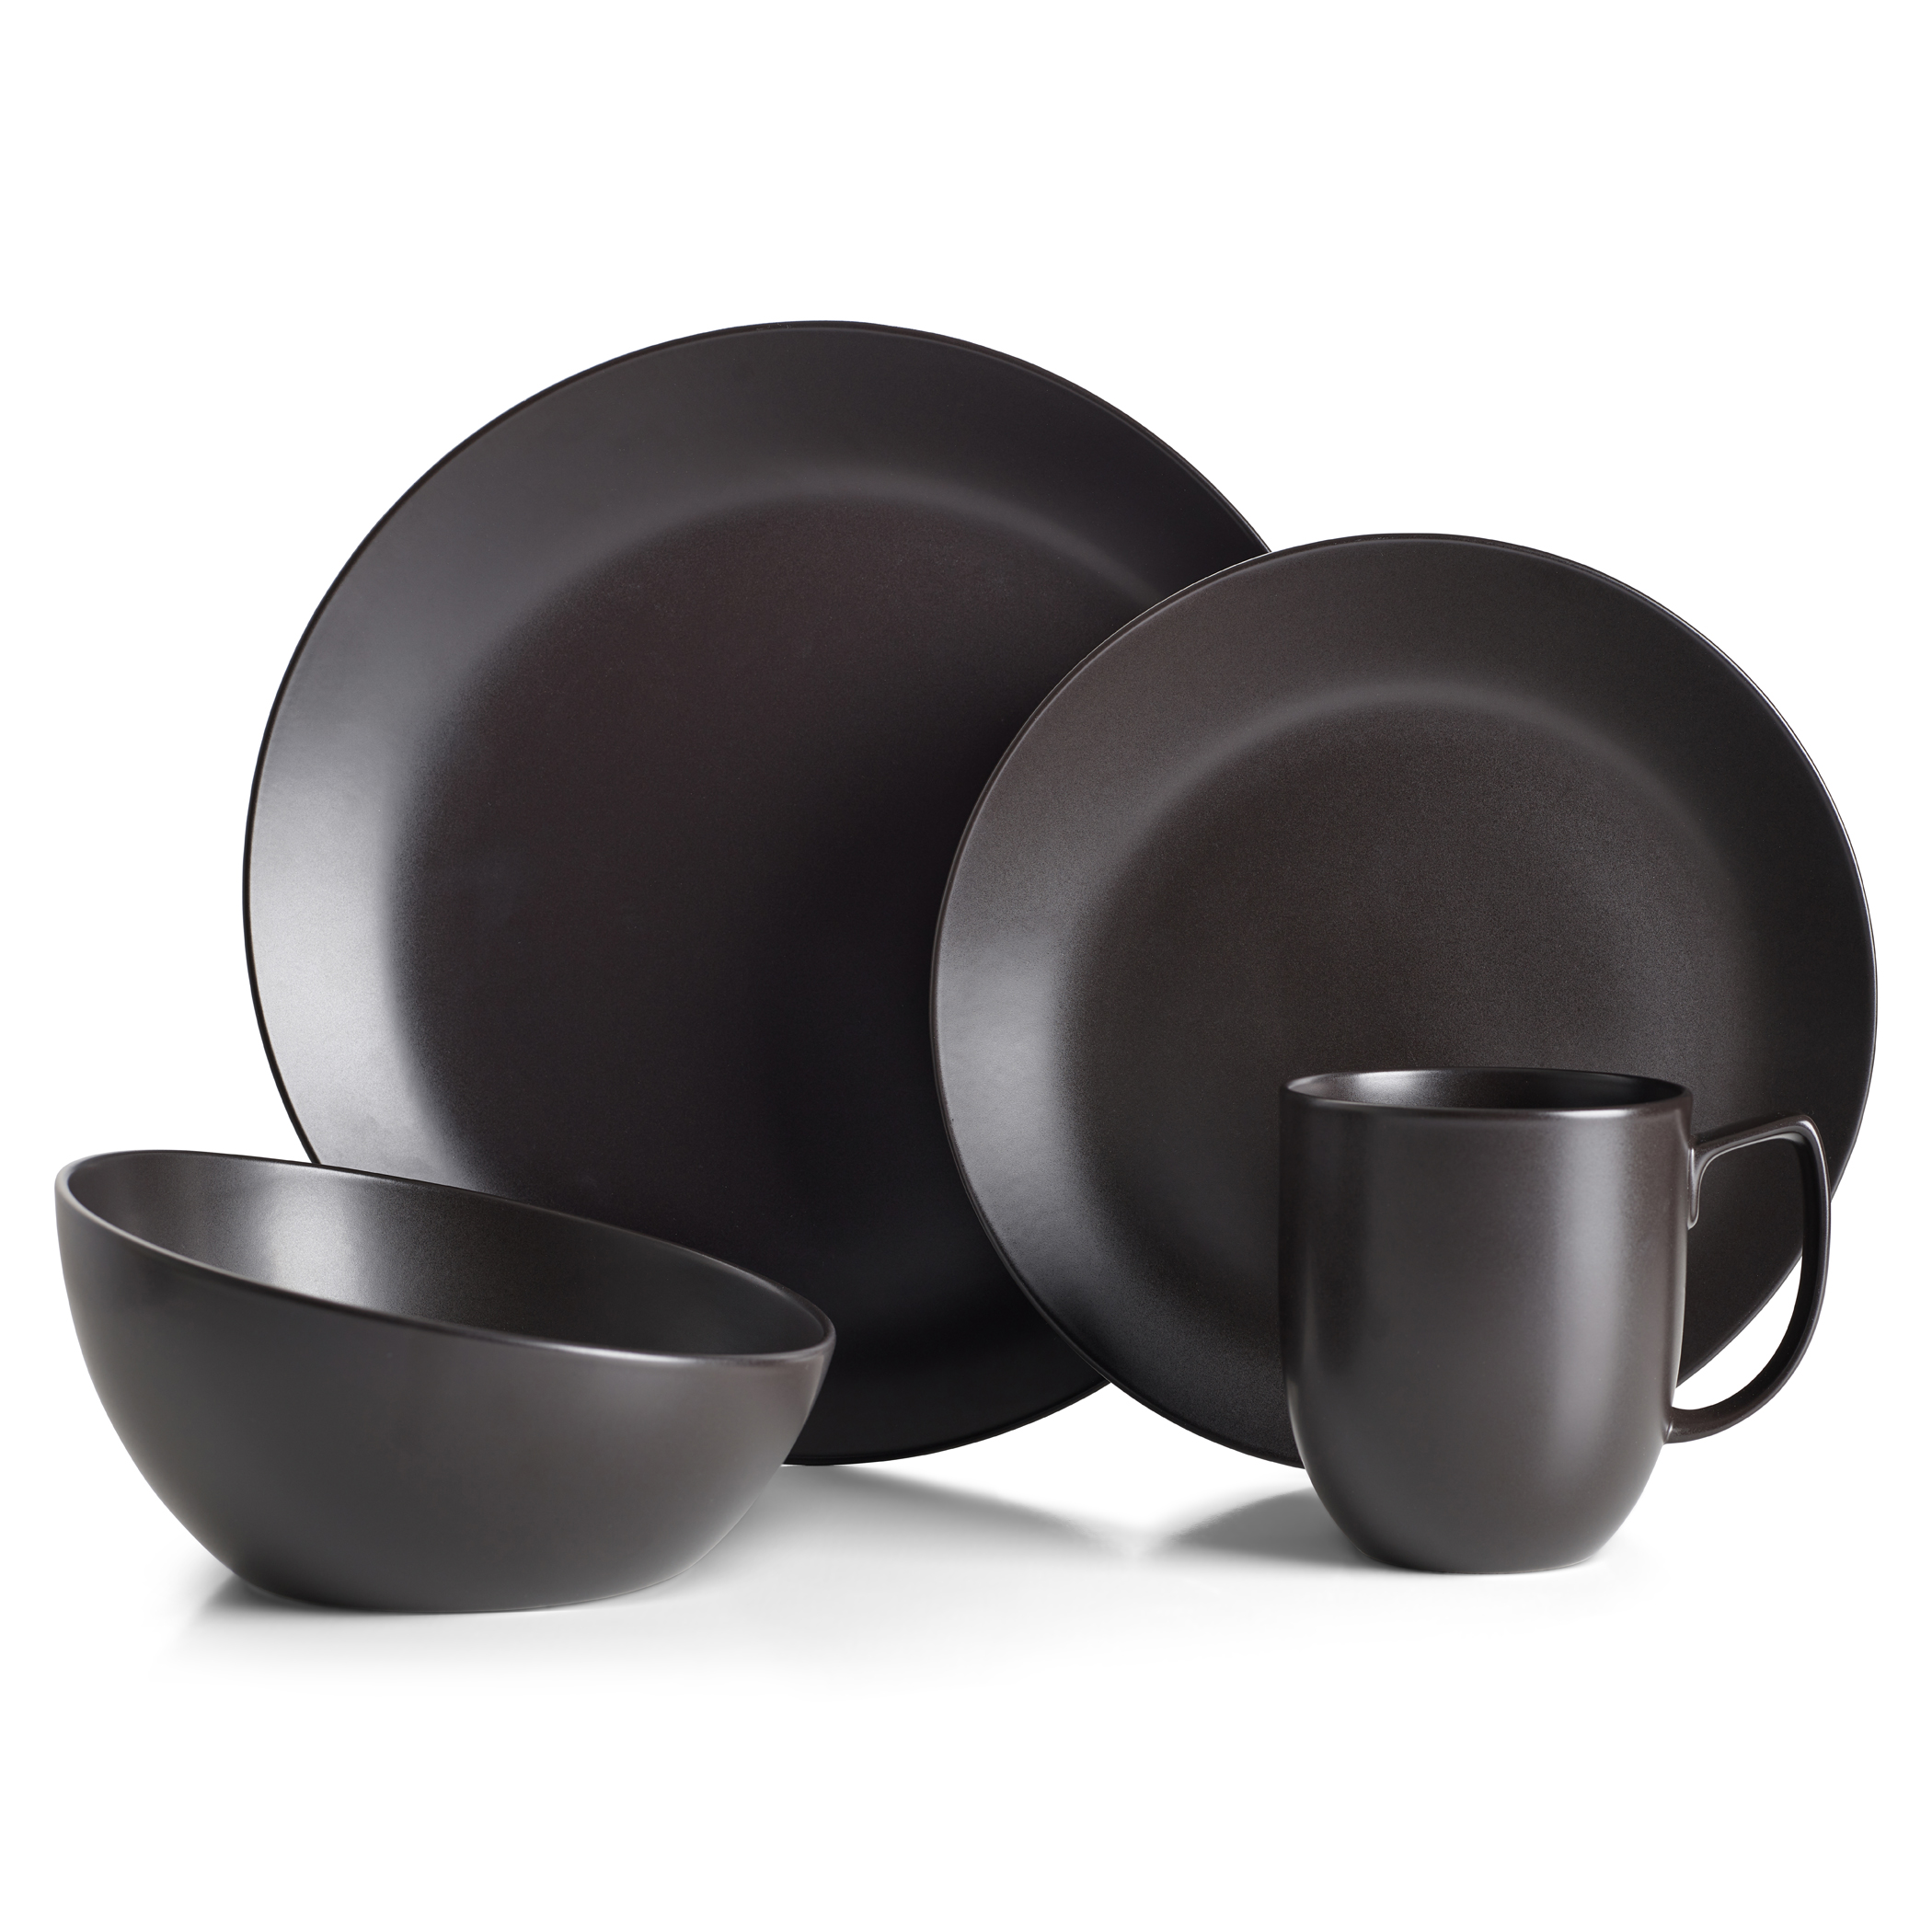 Orbit 4-Piece Place Setting - Celestial Black image number null